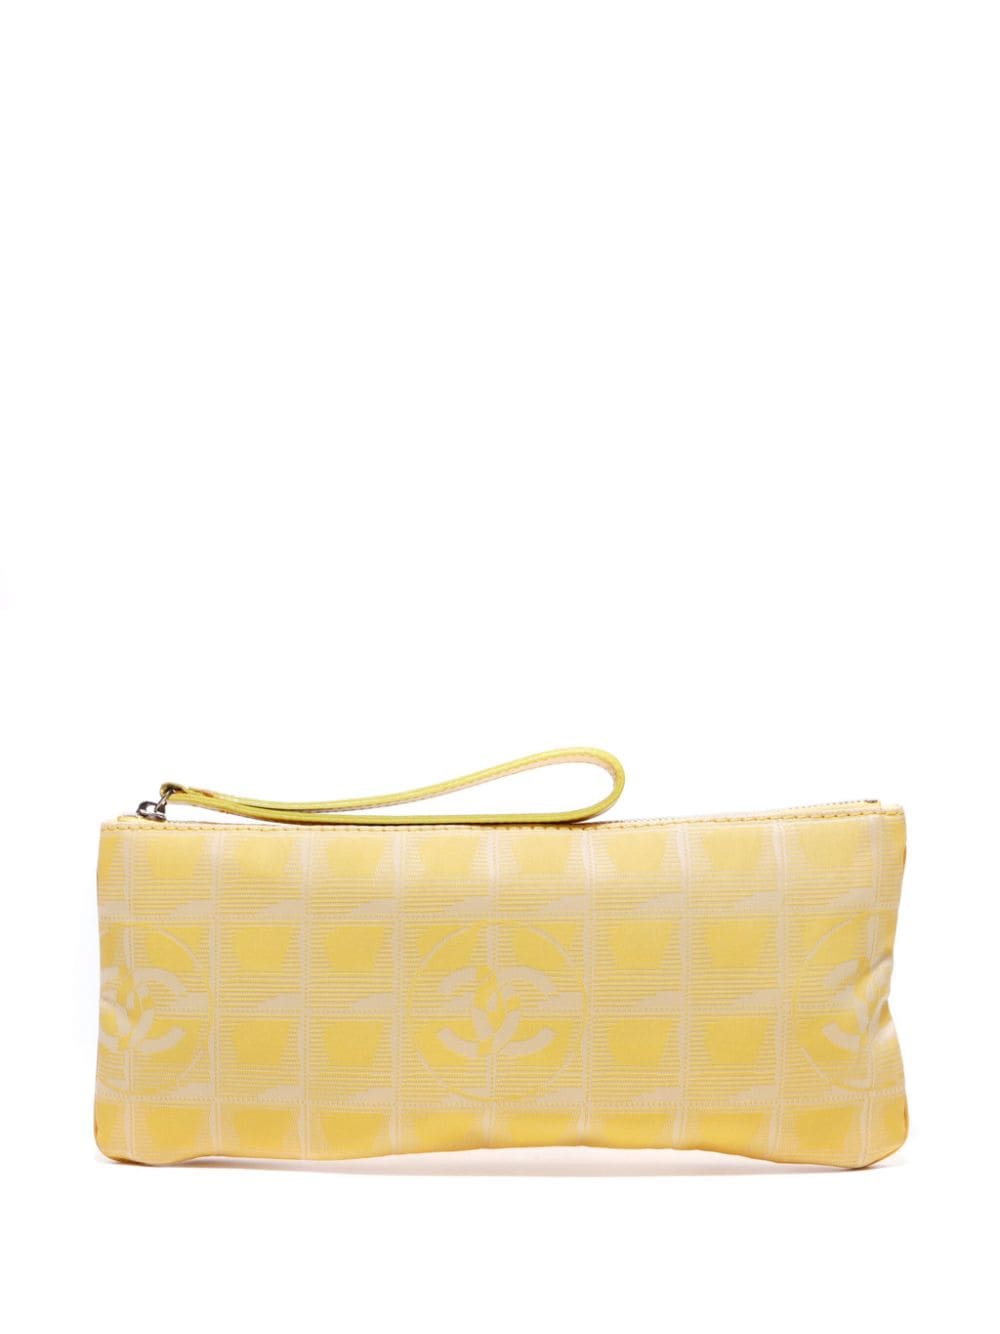 Pre-owned Chanel 2002 New Travel Pouch In Yellow